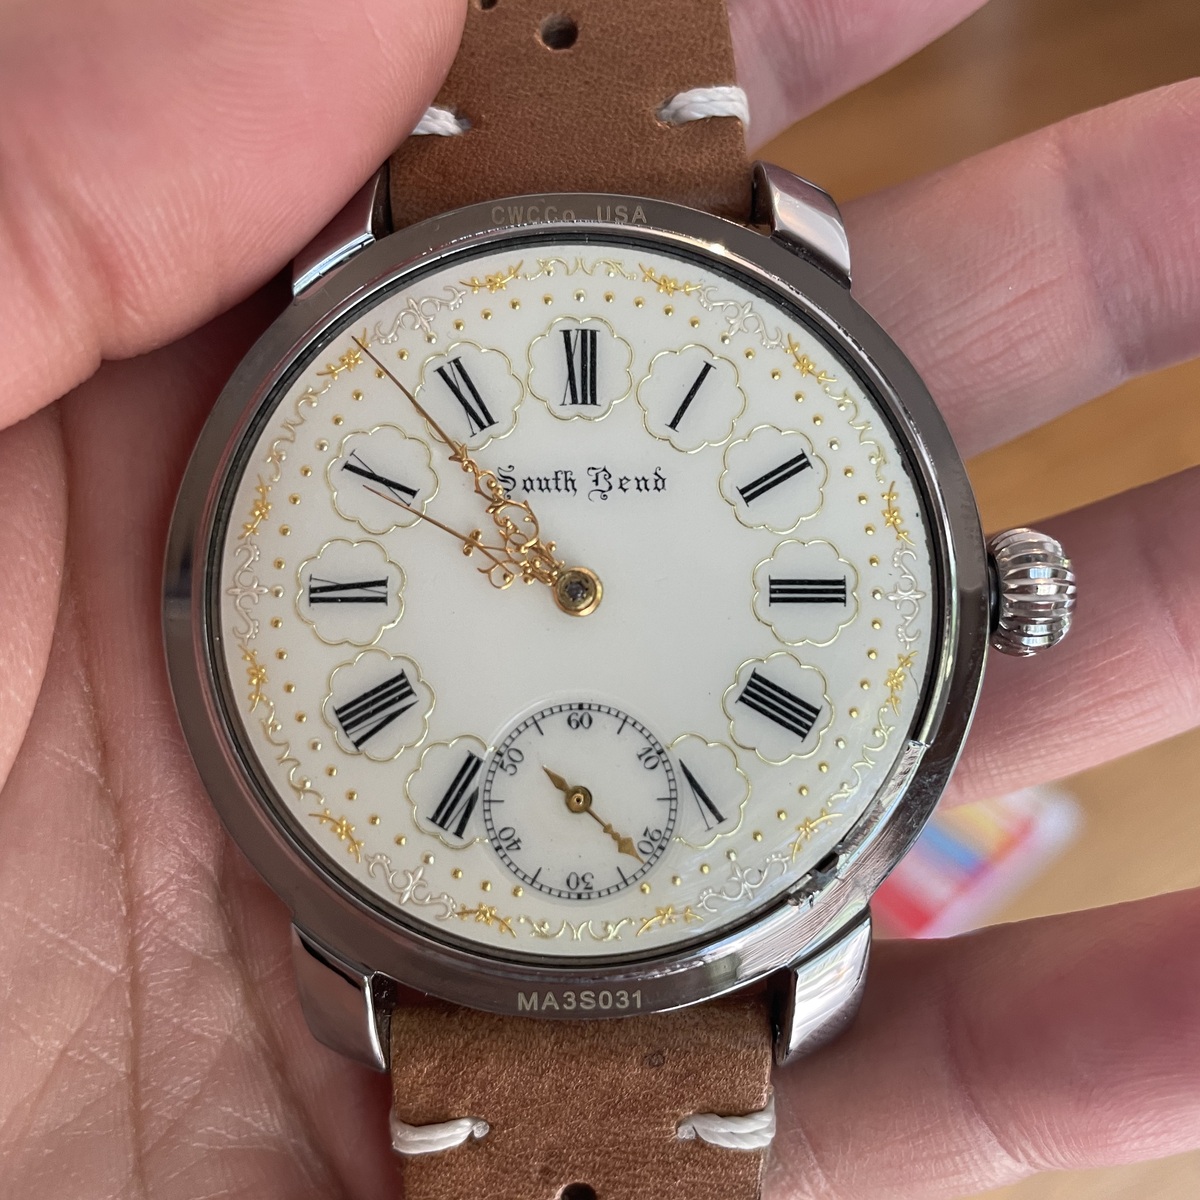 South Bend Watch Company Model 2 1910 Fancy Dial w/ Fancy Hands Front without Crystal